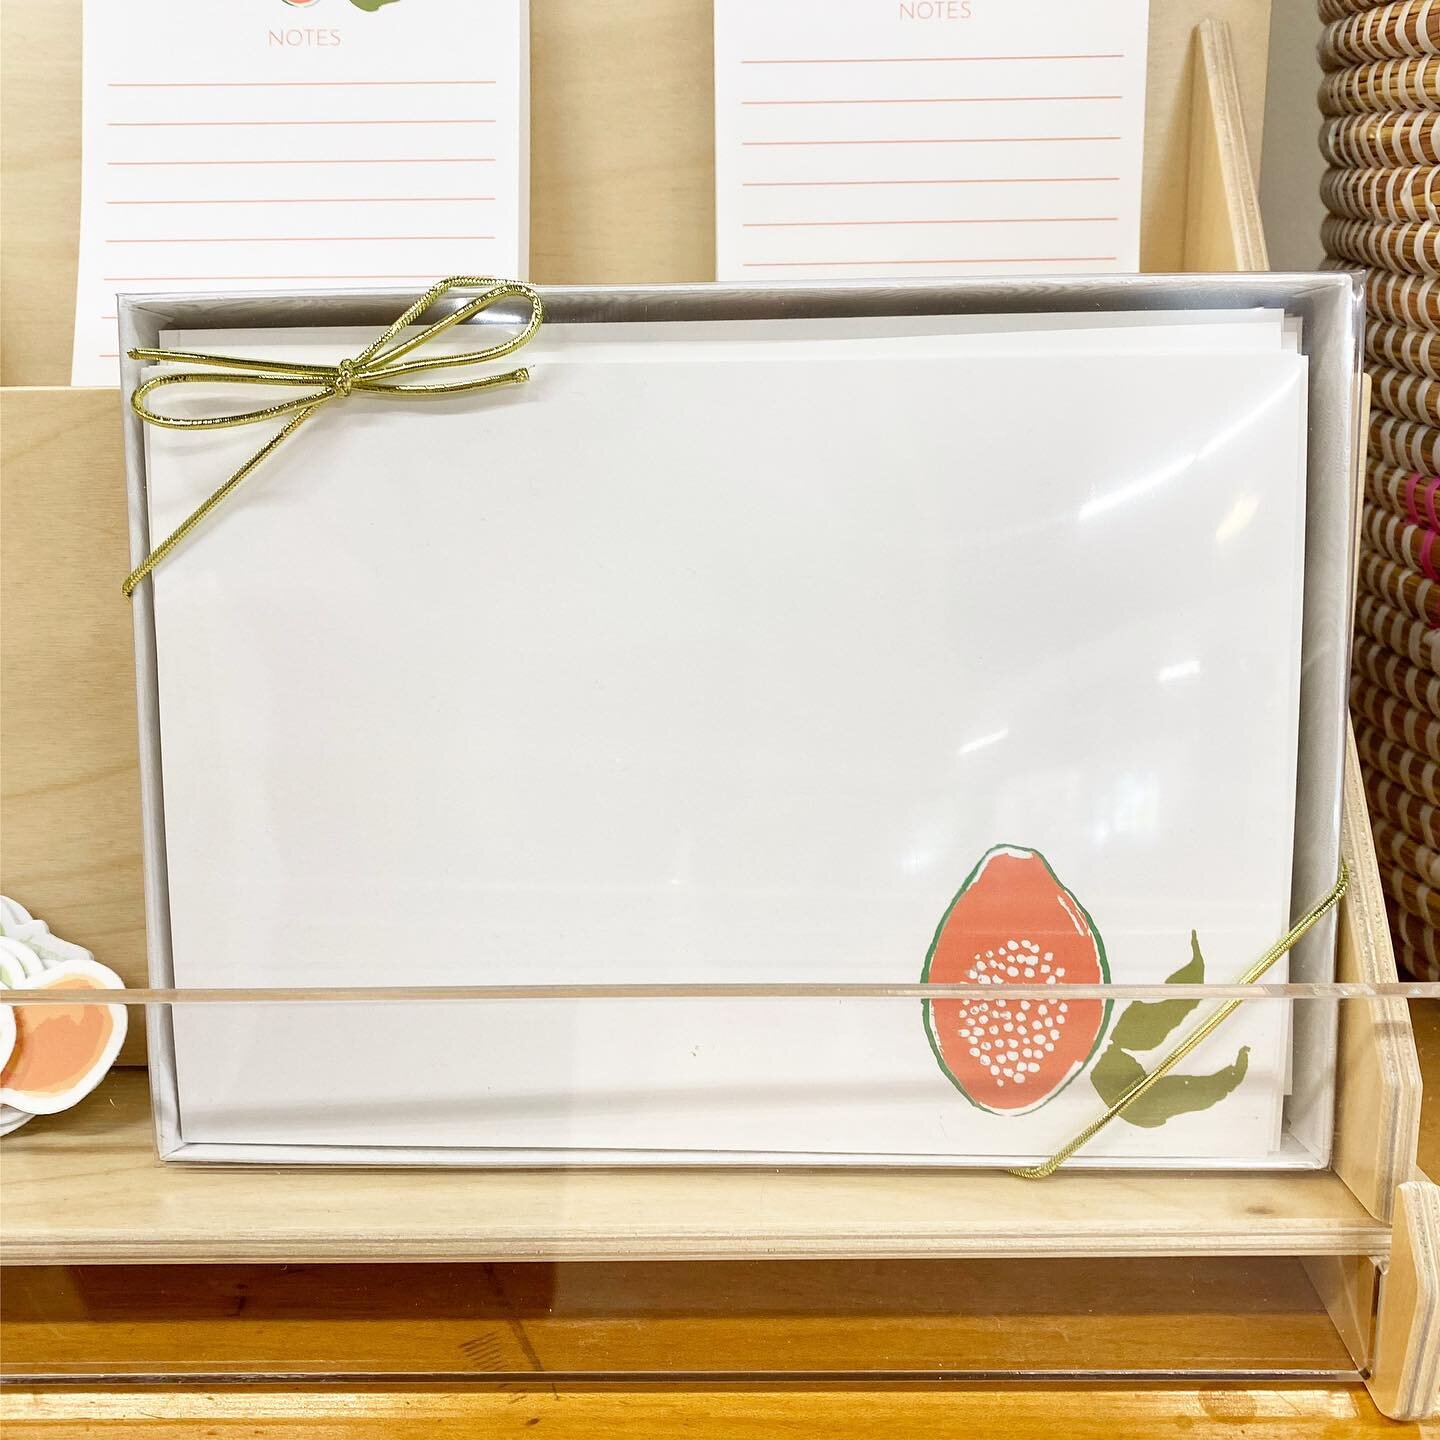 Need to send some thank you notes? These cute papaya note card sets are handy to have. I use them when I don&rsquo;t have an appropriate card on hand or want to write a few extra lines. Pick some up at the shop in Lander. We are open in April and May